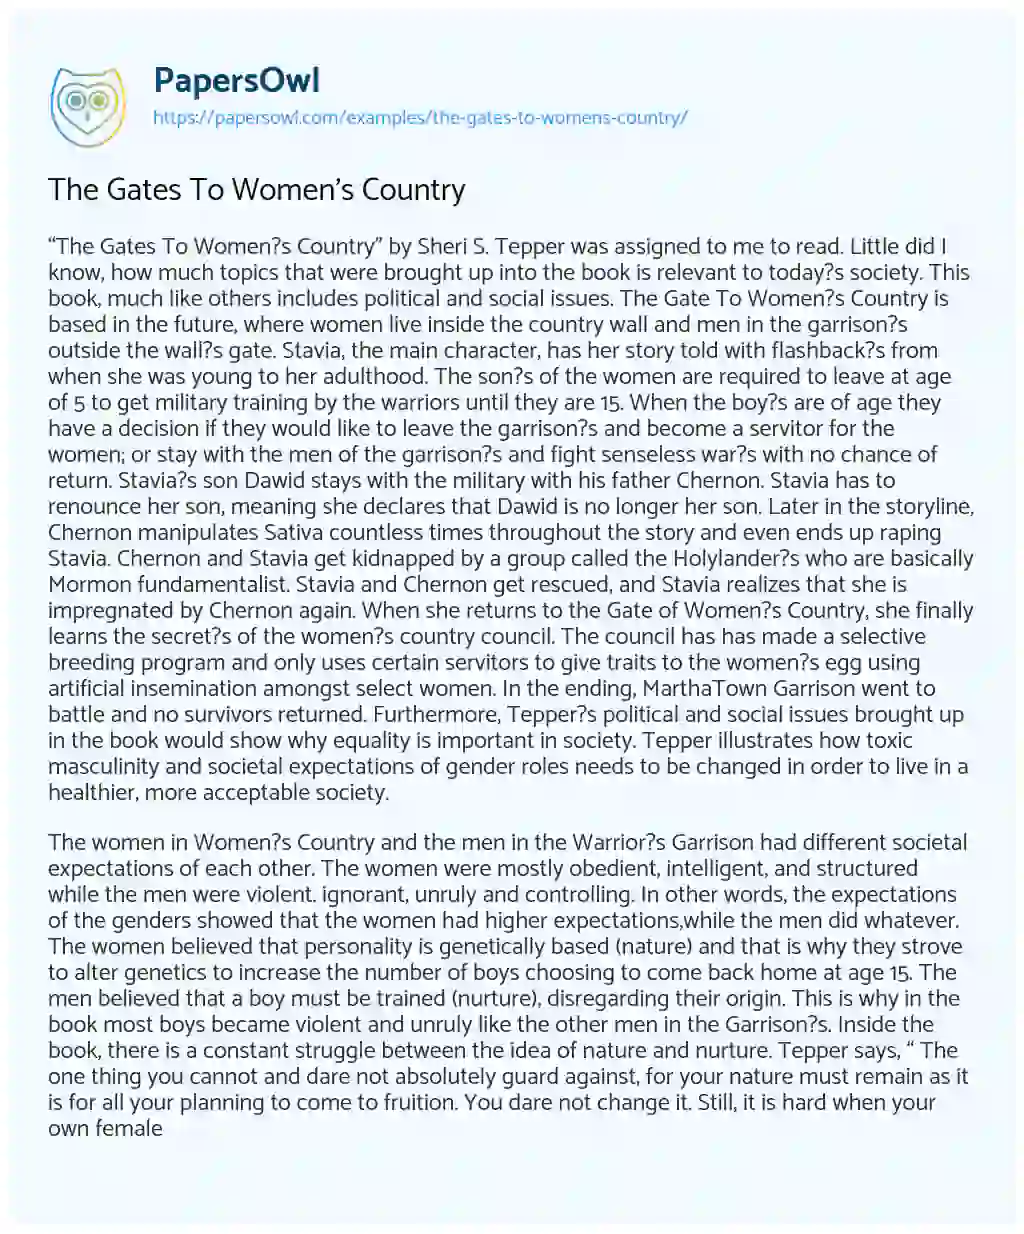 Essay on The Gates to Women’s Country